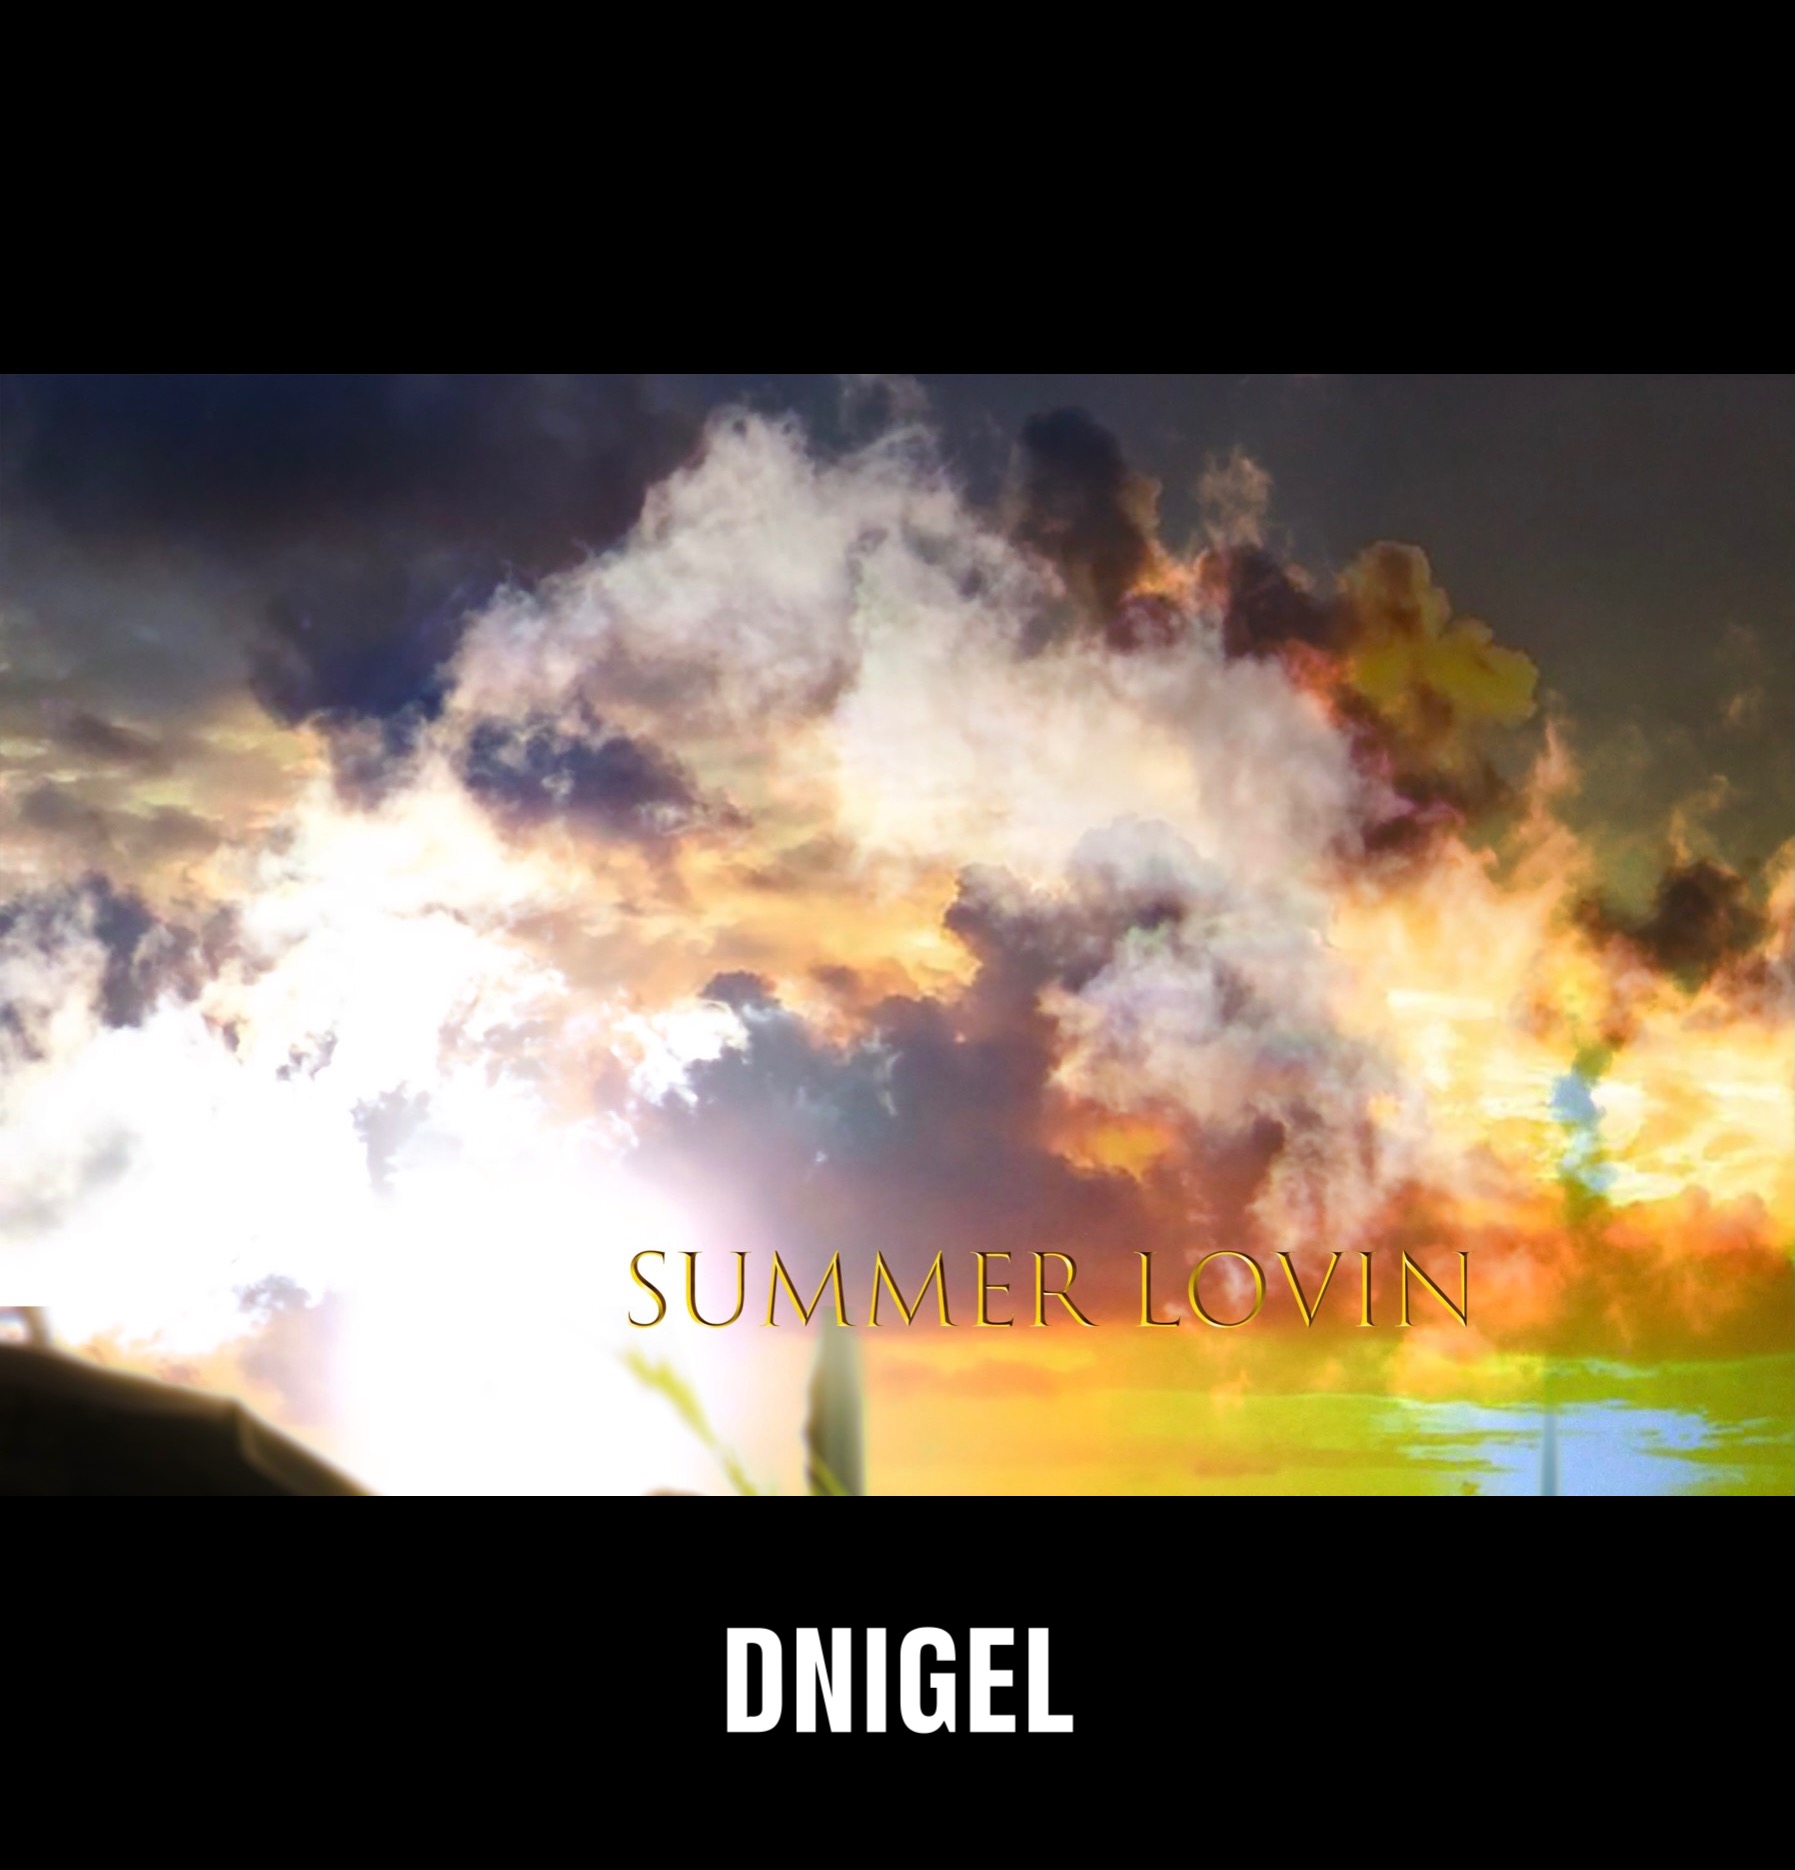 With a groovy summer vibe check out Dnigel ft Steve Drakes who release their ‘Summer Lovin’